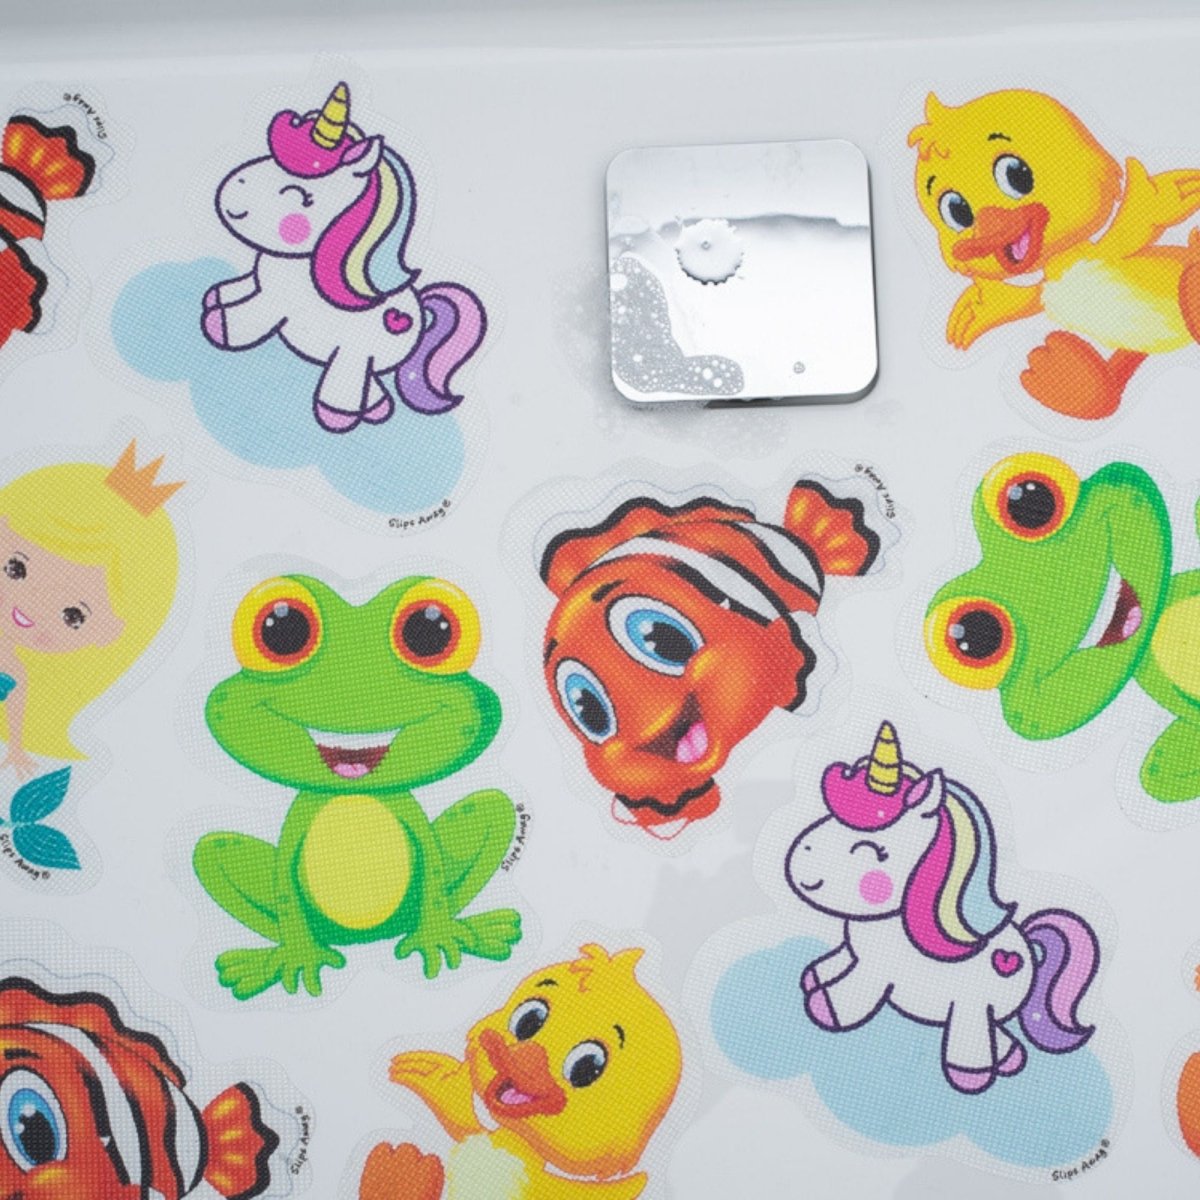 Non Slip Kids Bath Stickers to help prevent slips and falls in the bath- Slips Away